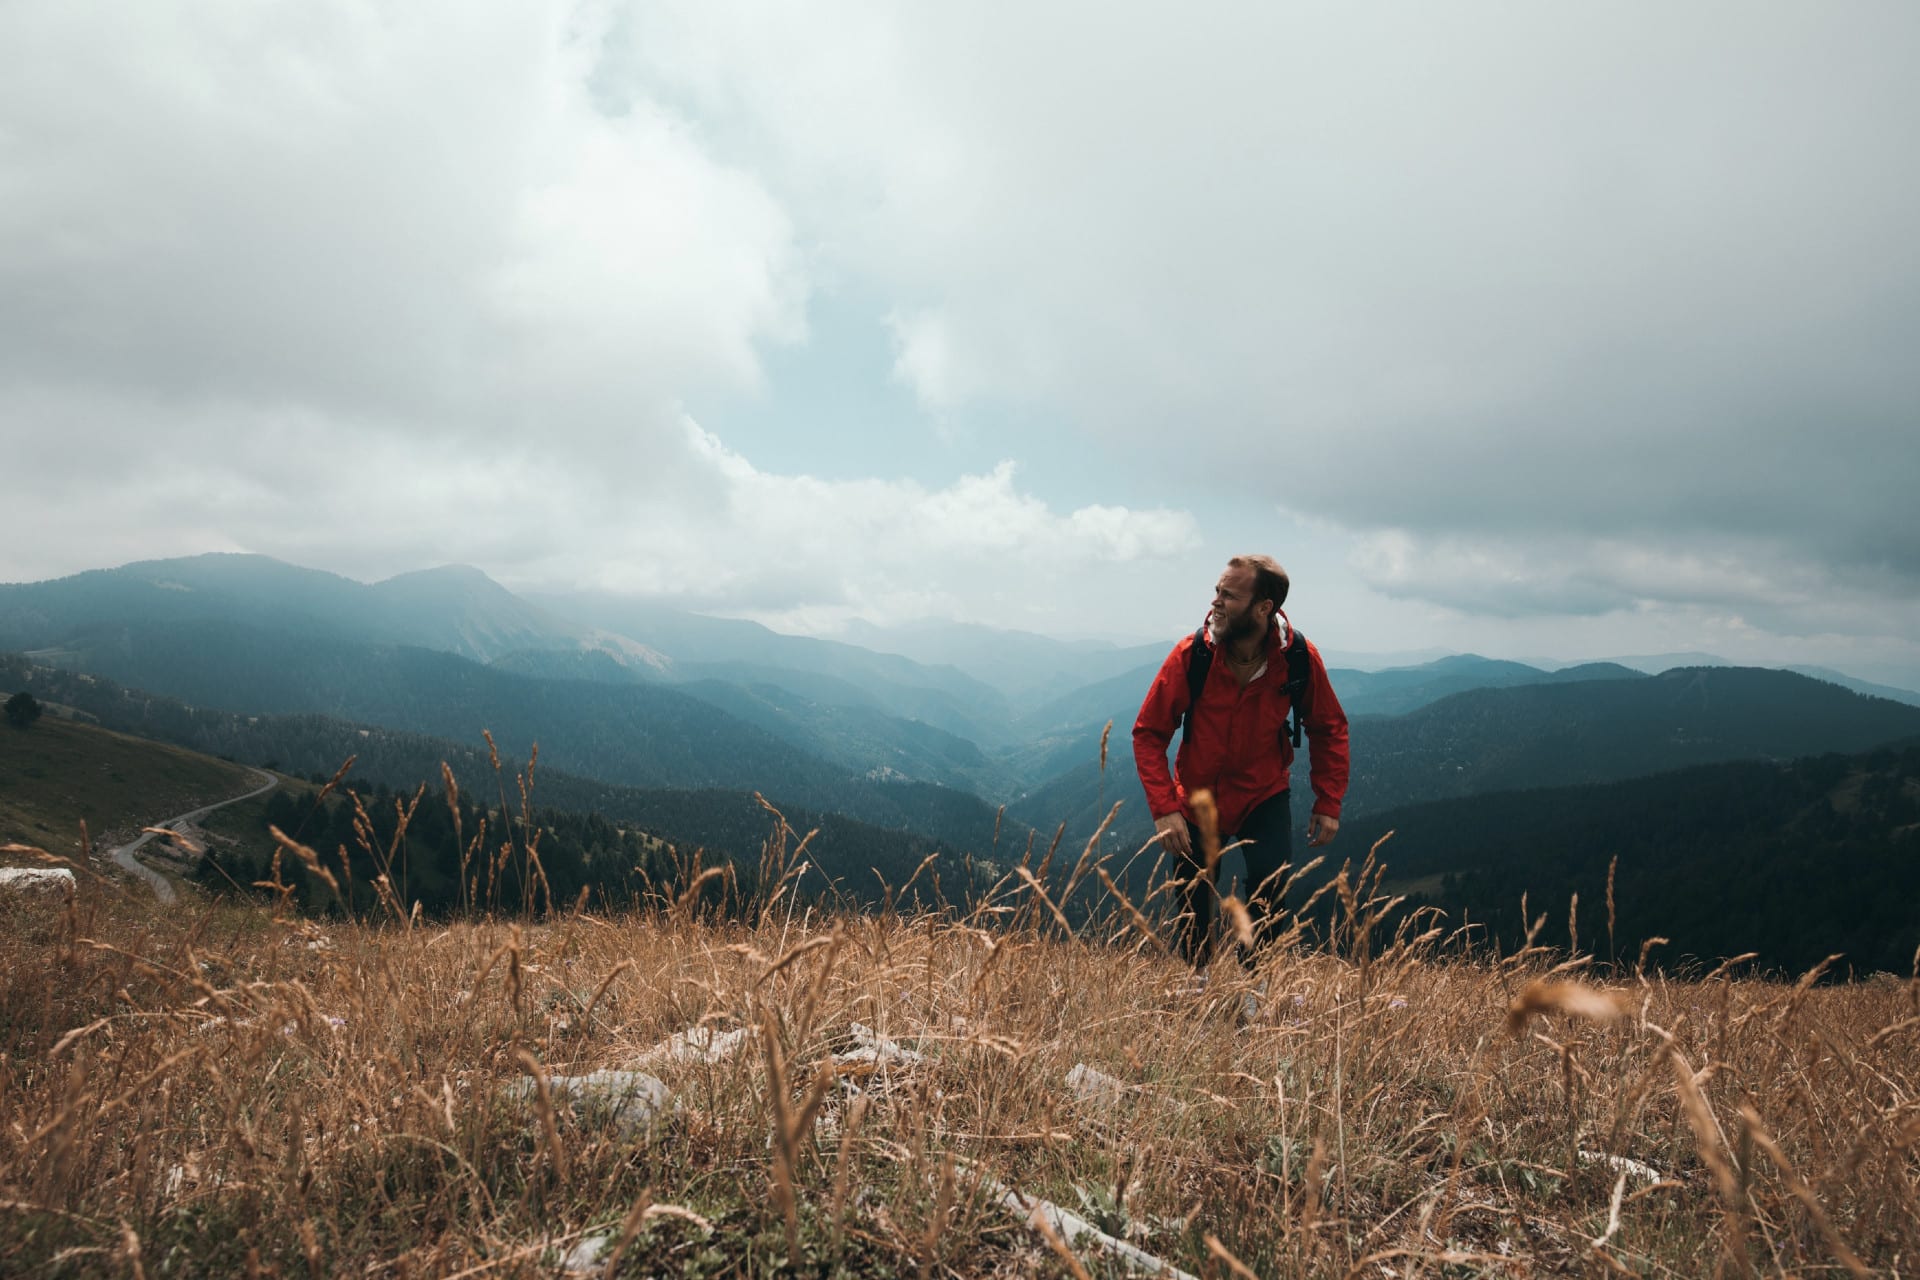 A man in a red coat, hiking up a mountain range.